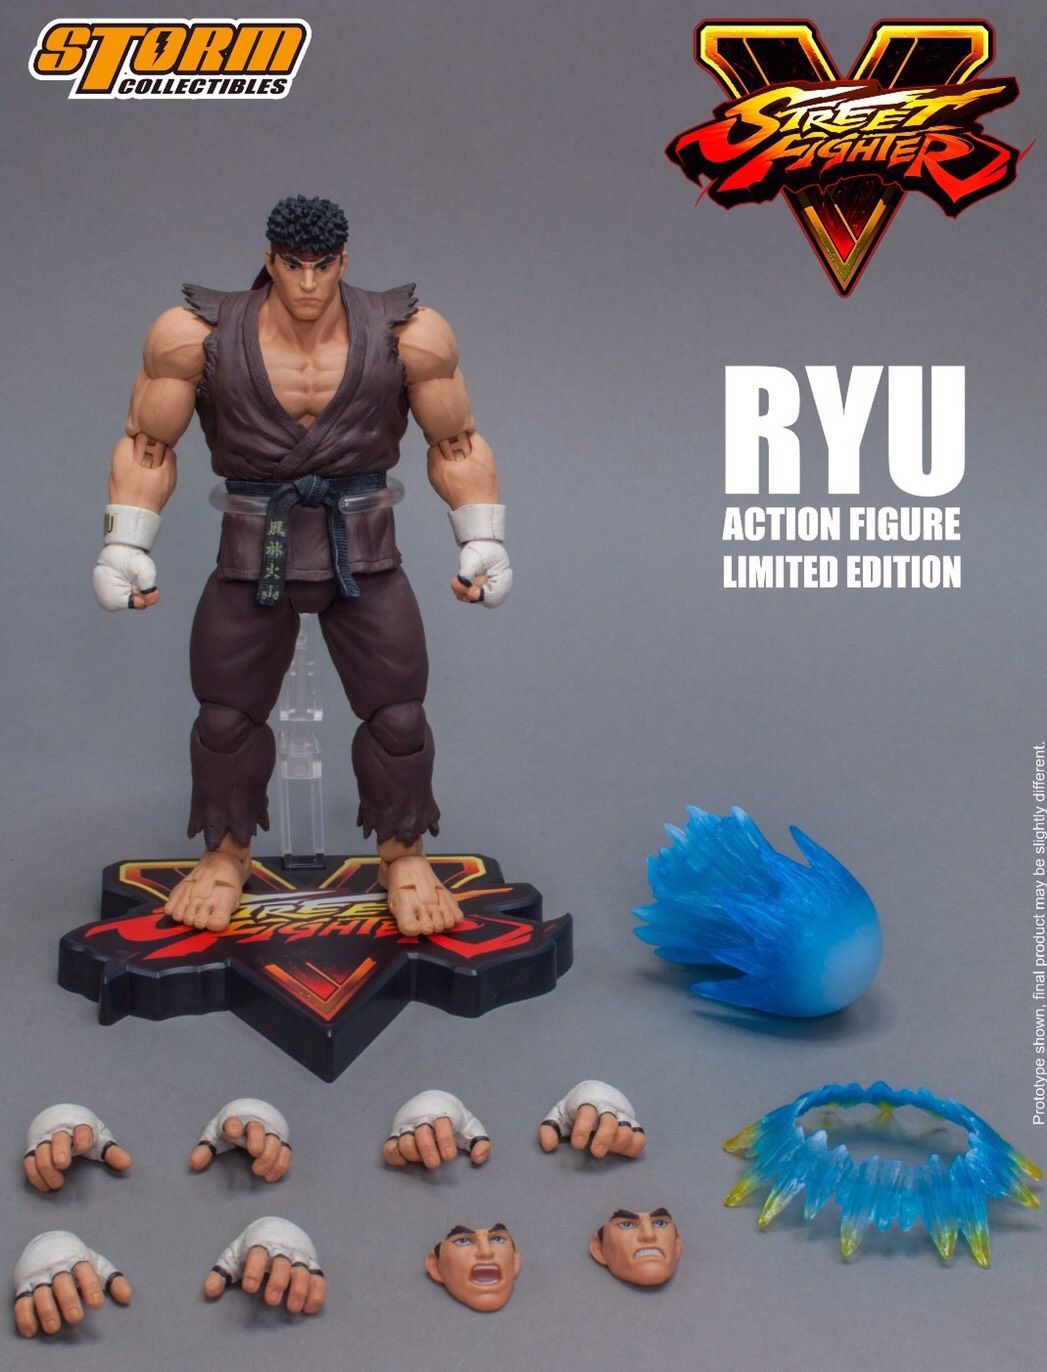 hot ryu storm collectibles